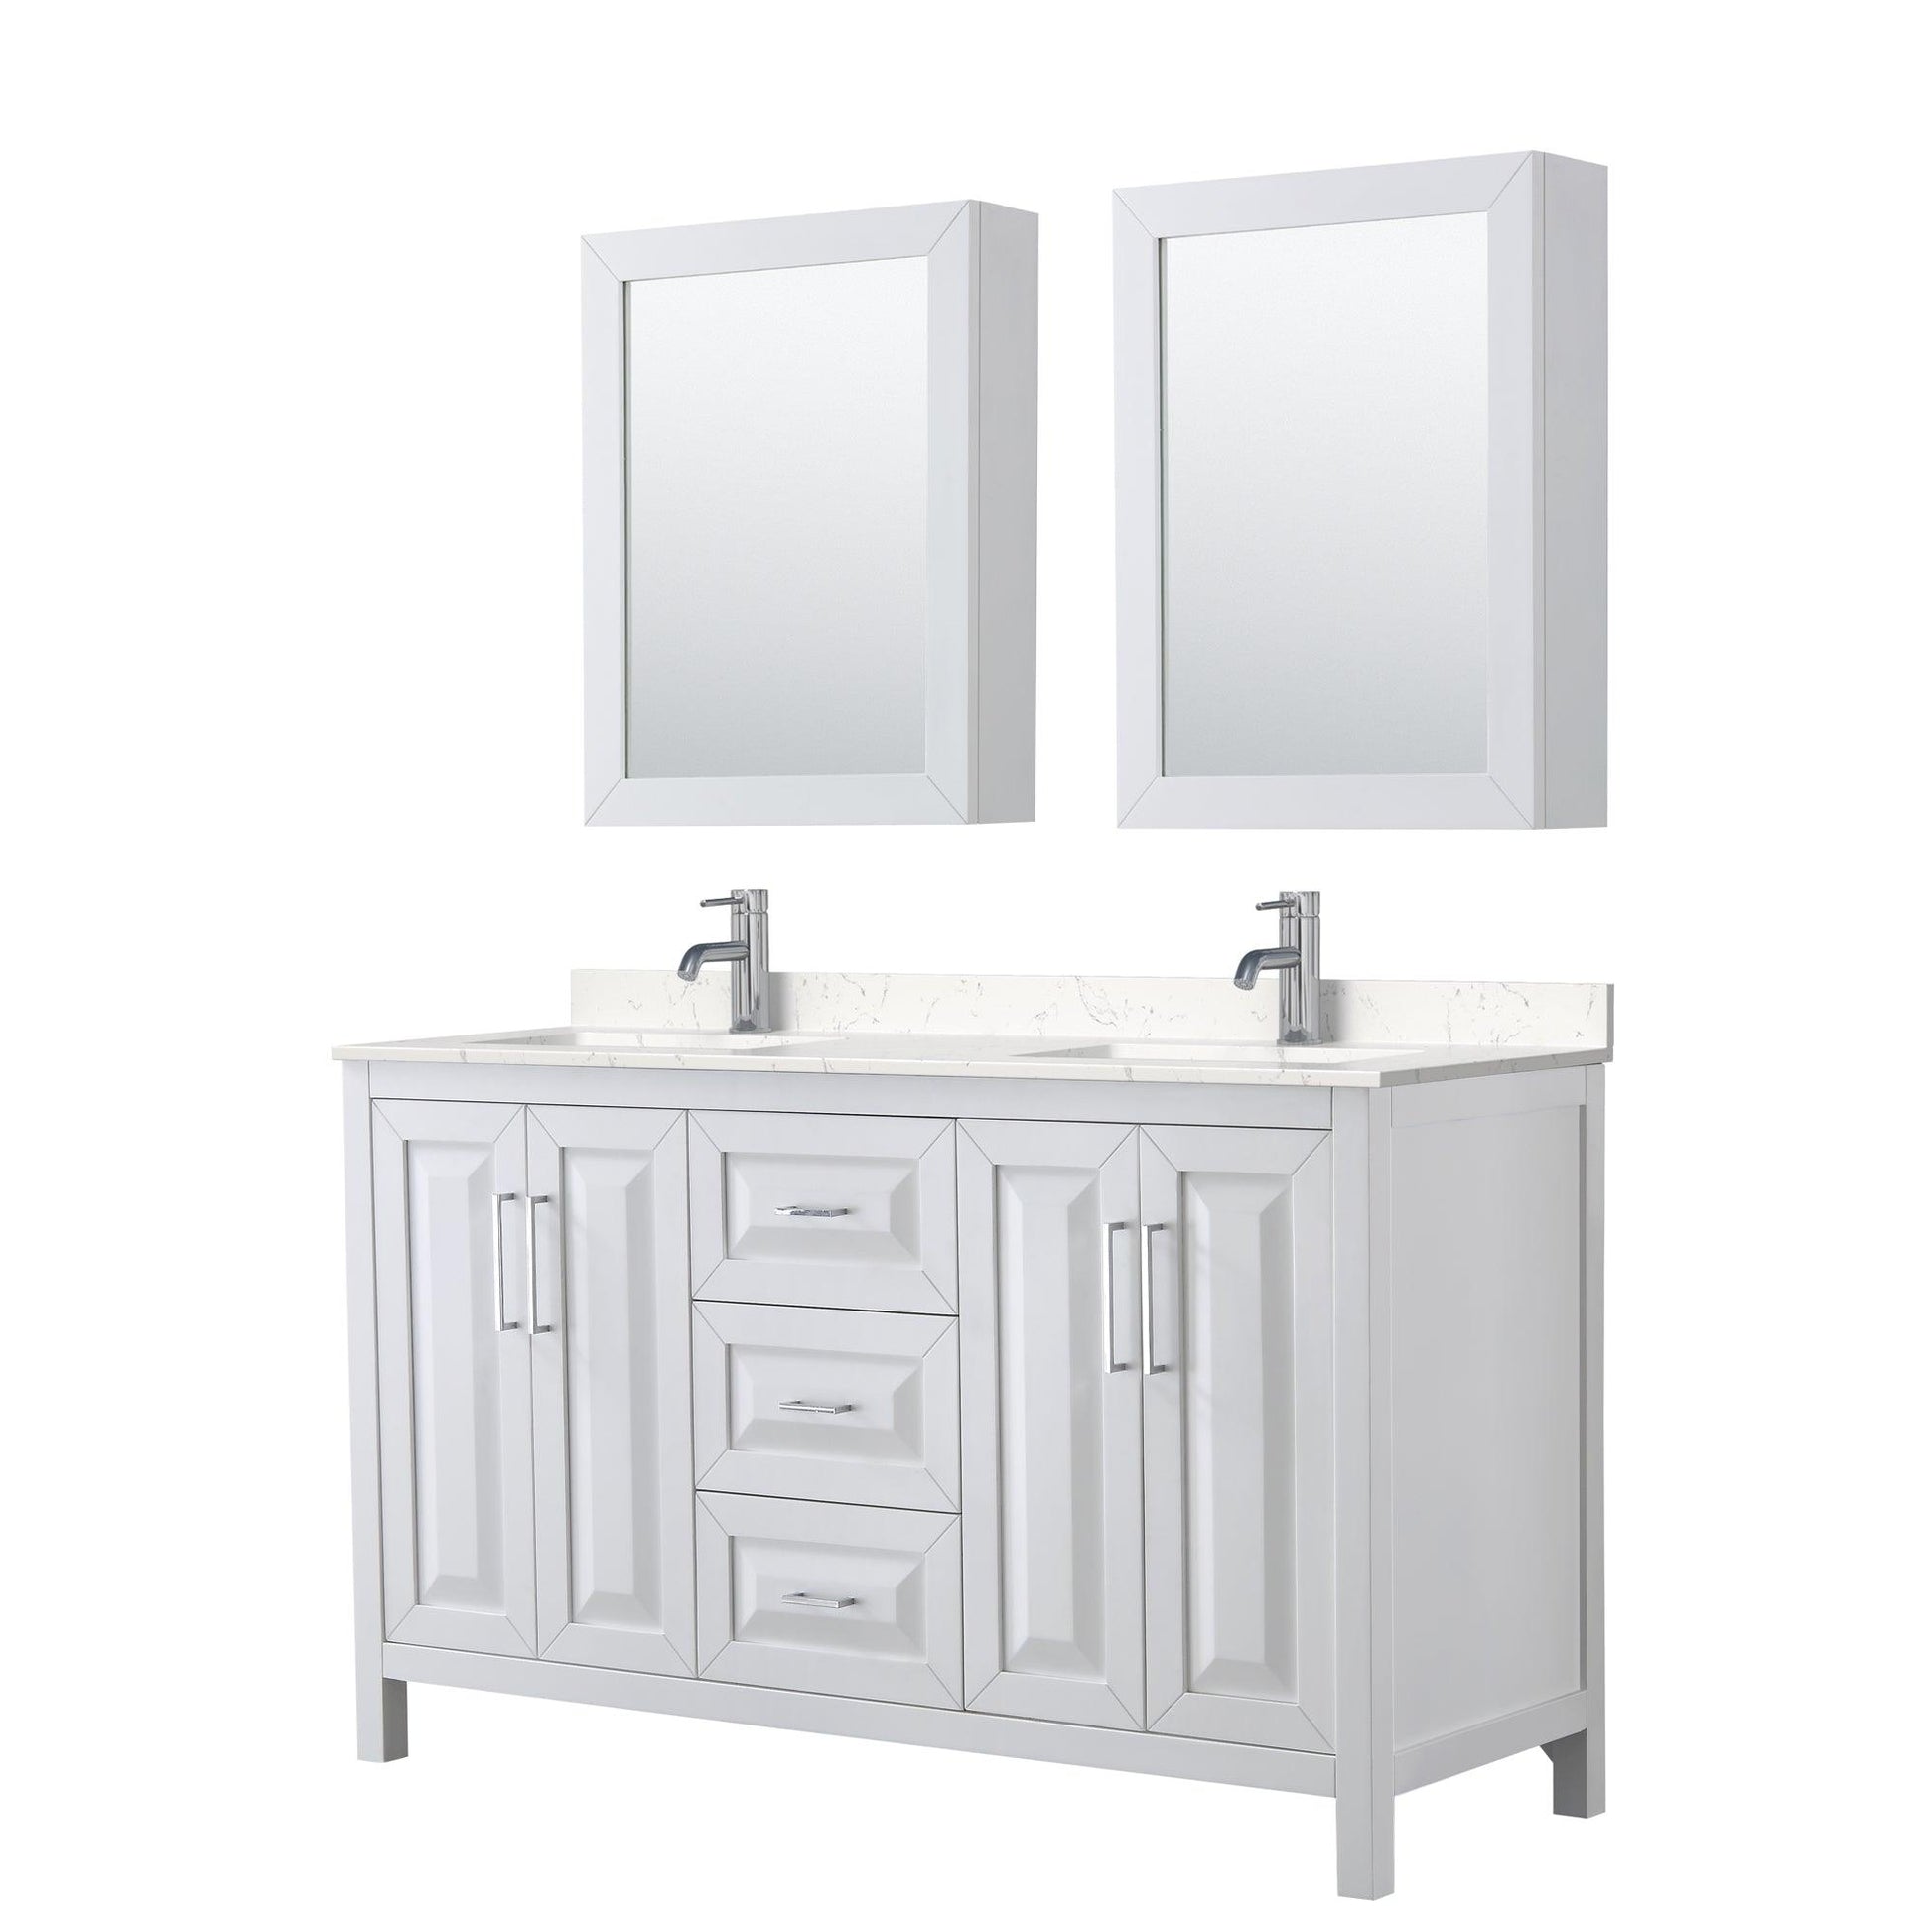 
  
  Wyndham Collection Daria Double Bathroom Vanity with Light-Vein Carrara Cultured Marble Countertop, Undermount Square Sinks, and Optional Mirror/Medicine Cabinet
  
